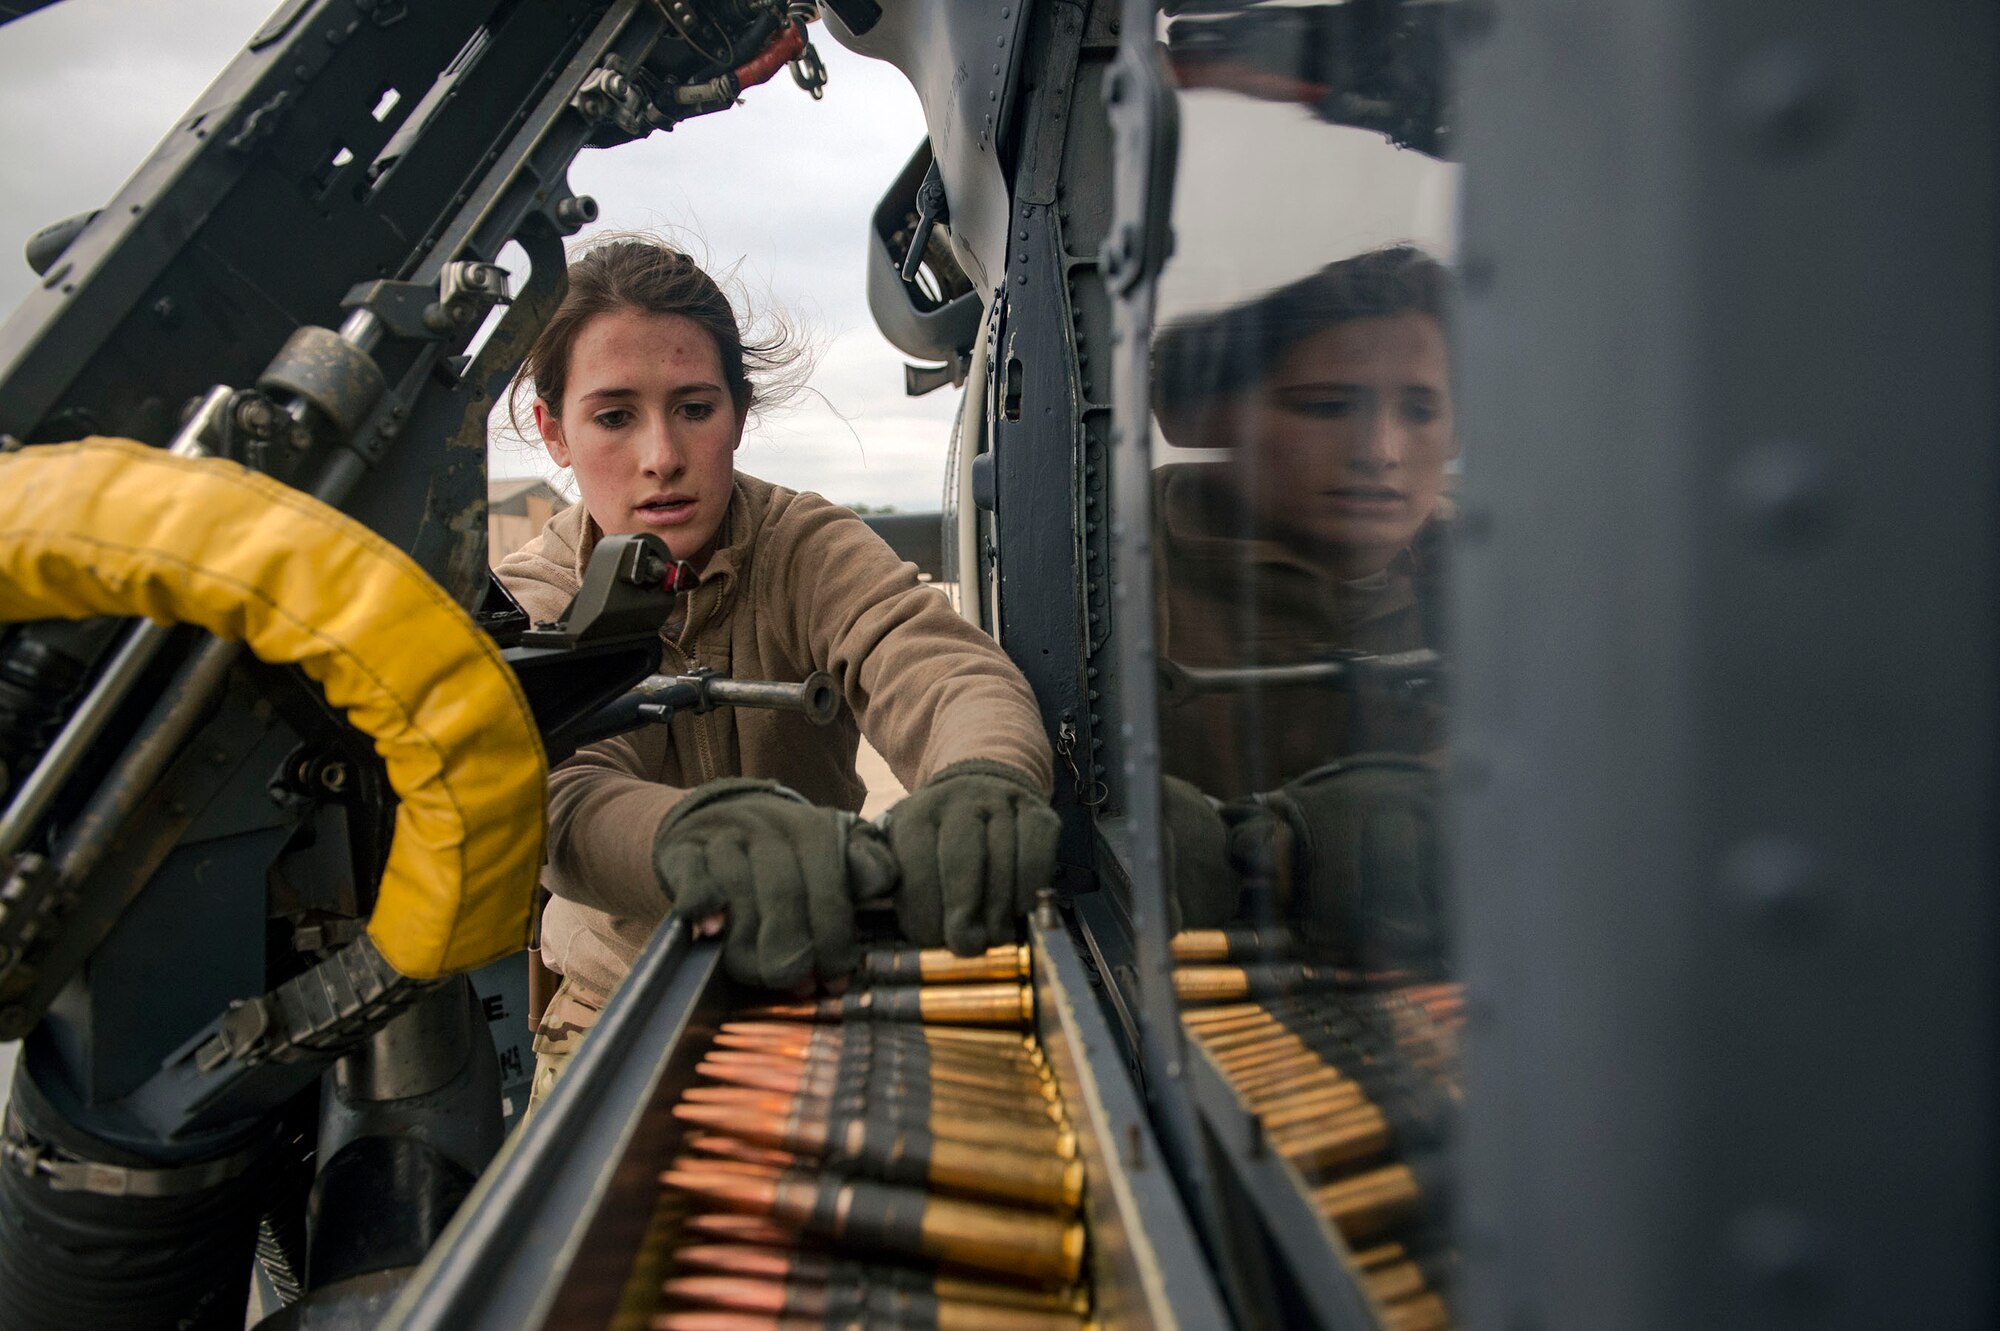 Airman 1st Class Lauren Cox, 41st Rescue Squadron (RQS) special missions aviator, loads ammunition into an M2 machine gun mount on an HH-60G Pave Hawk helicopter during routine training, Jan. 16, 2019, at Moody Air Force Base, Ga. To optimally perform their Combat Search and Rescue mission downrange, the 347th Rescue Group implemented the advanced training ‘hard crew’ system, which unifies the 38th and 41st RQS’s into separate rescue operator teams that’ll fly every mission together for their upcoming deployment. This concept establishes continuity and chemistry which will help maximize the 38th and 41st RQS’s mission readiness by simultaneously working together to build relationships and understand each other’s idiosyncrasies, strengths, and weaknesses to ultimately improve the team’s performance in mission execution. (U.S. Air Force photo by Senior Airman Greg Nash)